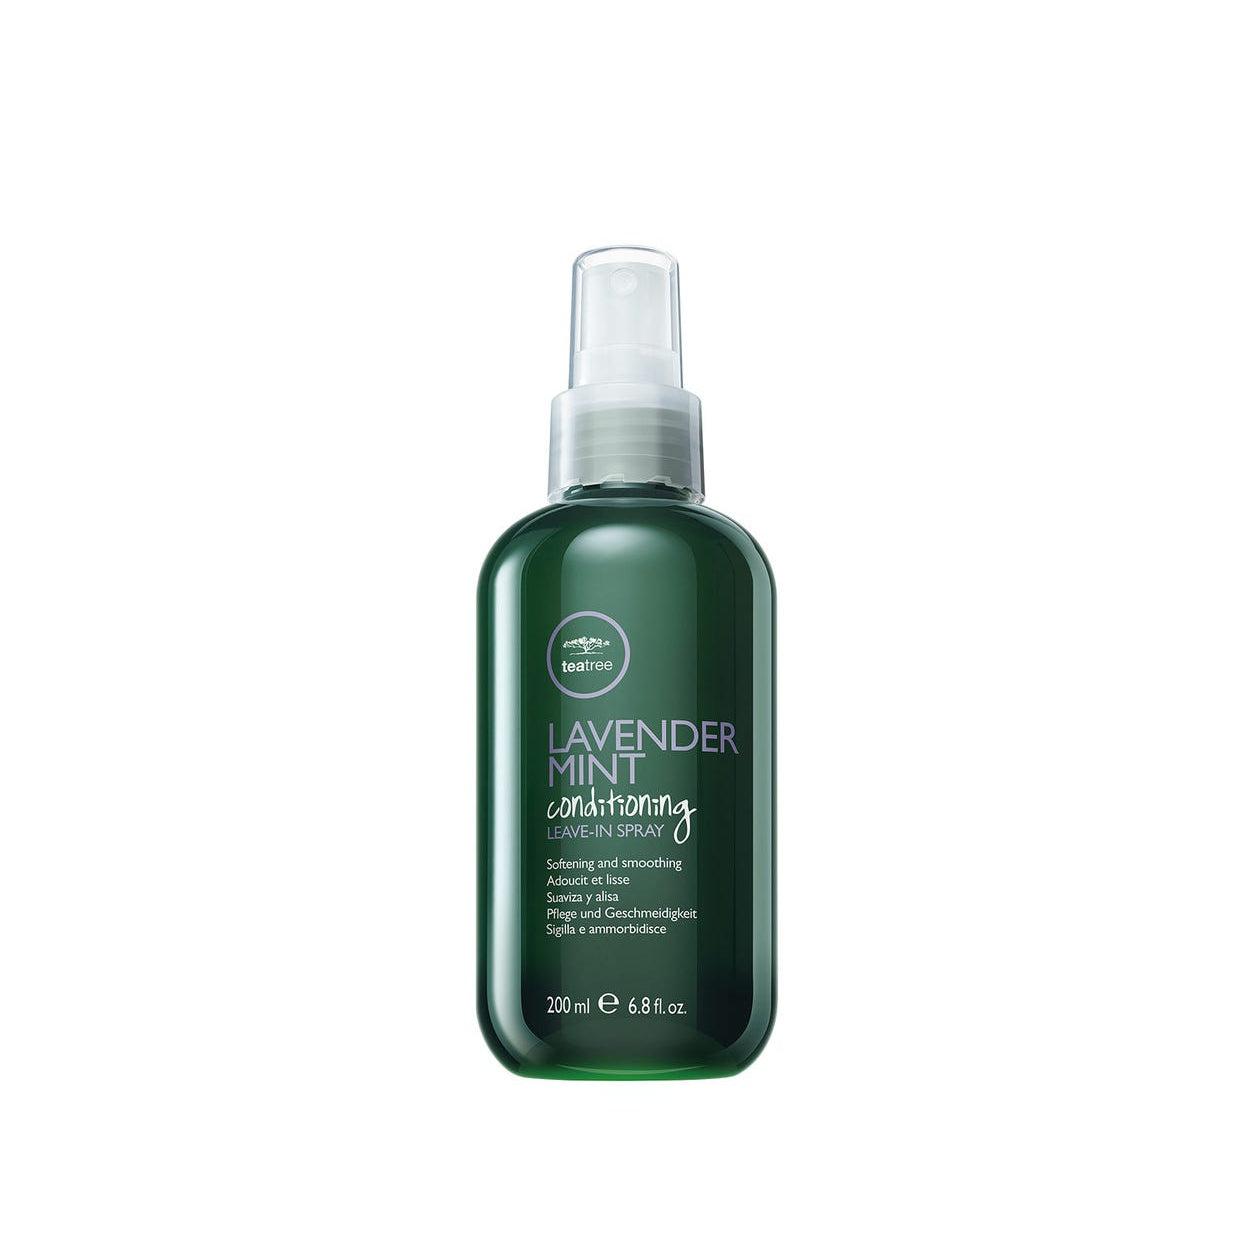 Paul Mitchell Tea Tree Lavender Mint Conditioning Leave In Spray 200ml